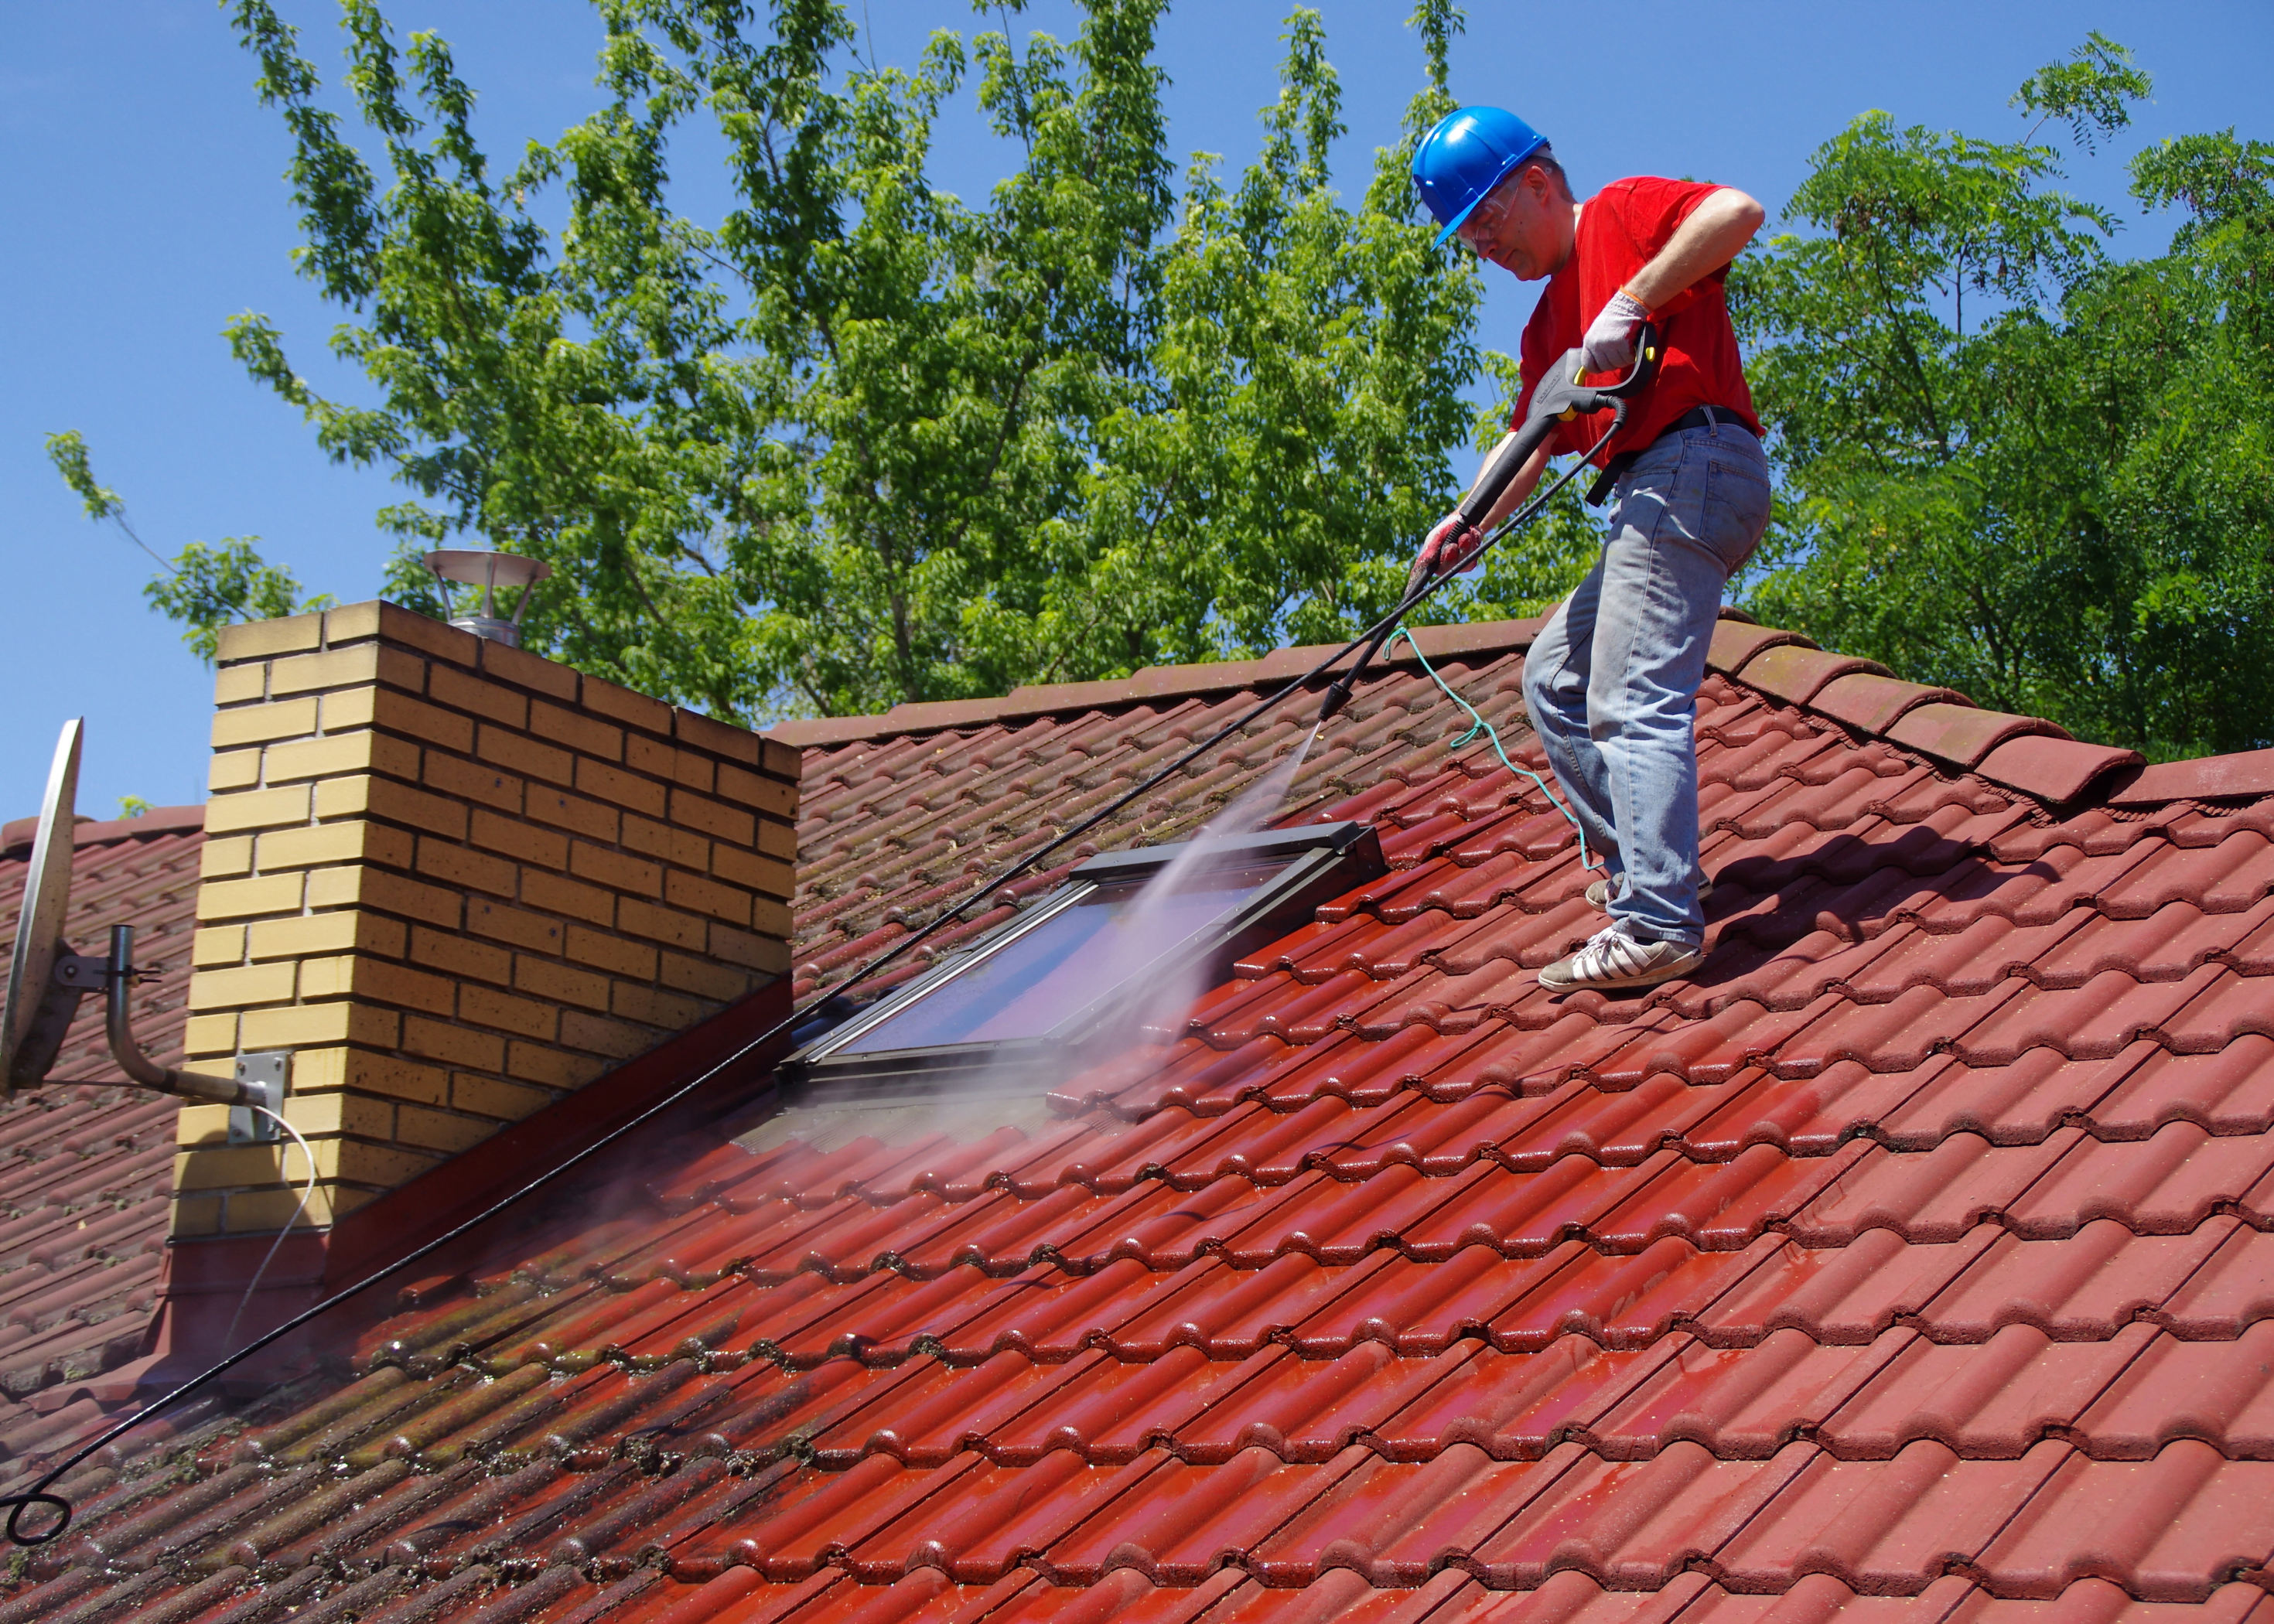 Worker on top of a house roof, cleaning tiles with a professional pressure tool, part of Ocala Handyman Co.'s Cleaning Services in Ocala, FL